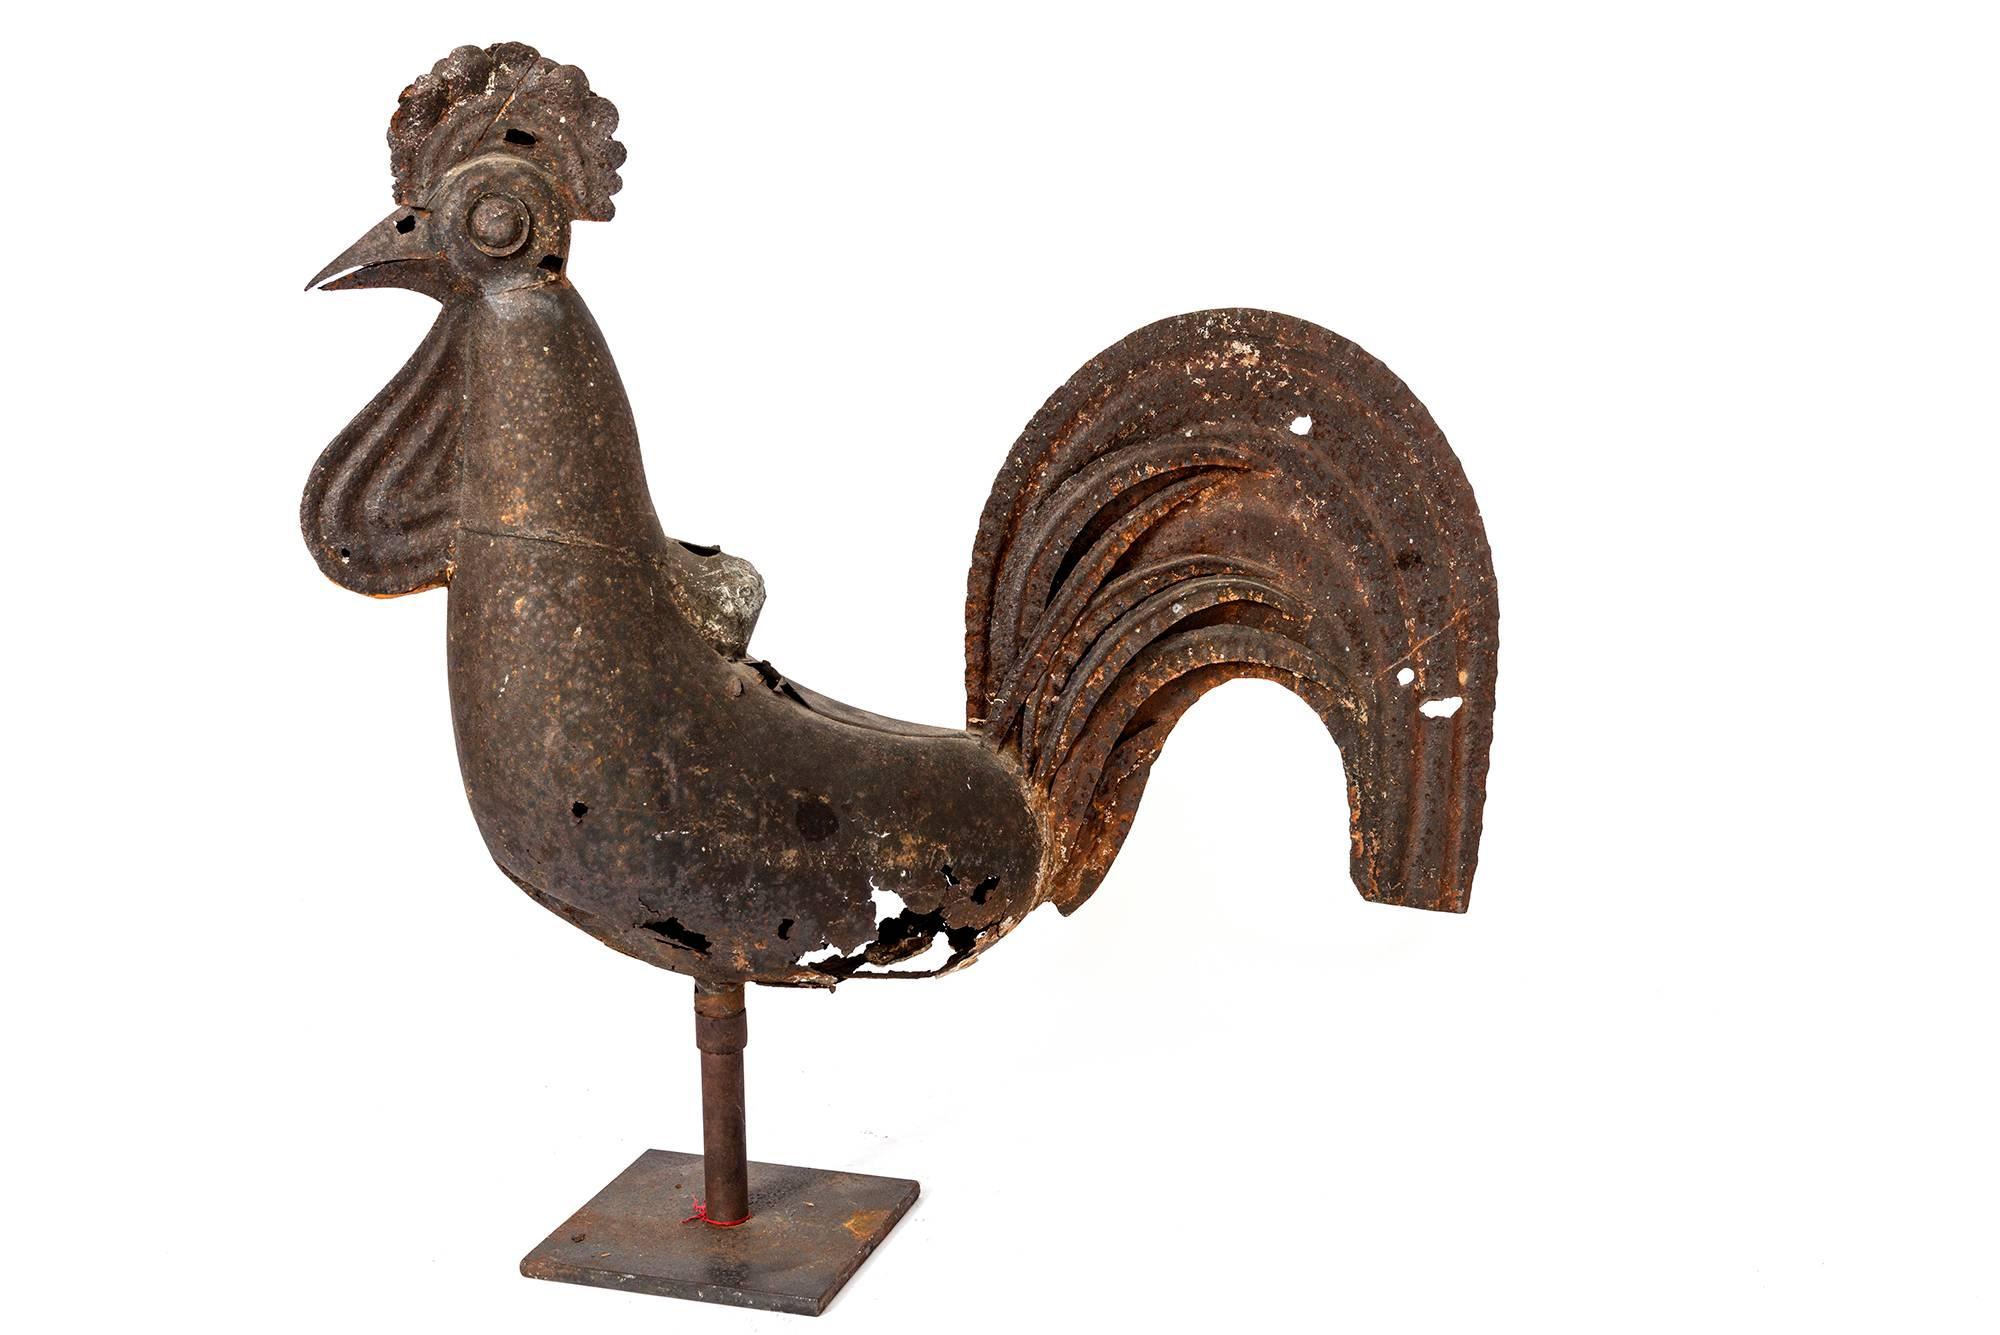 A distressed yet interesting rendition of a chicken on a stand from France.